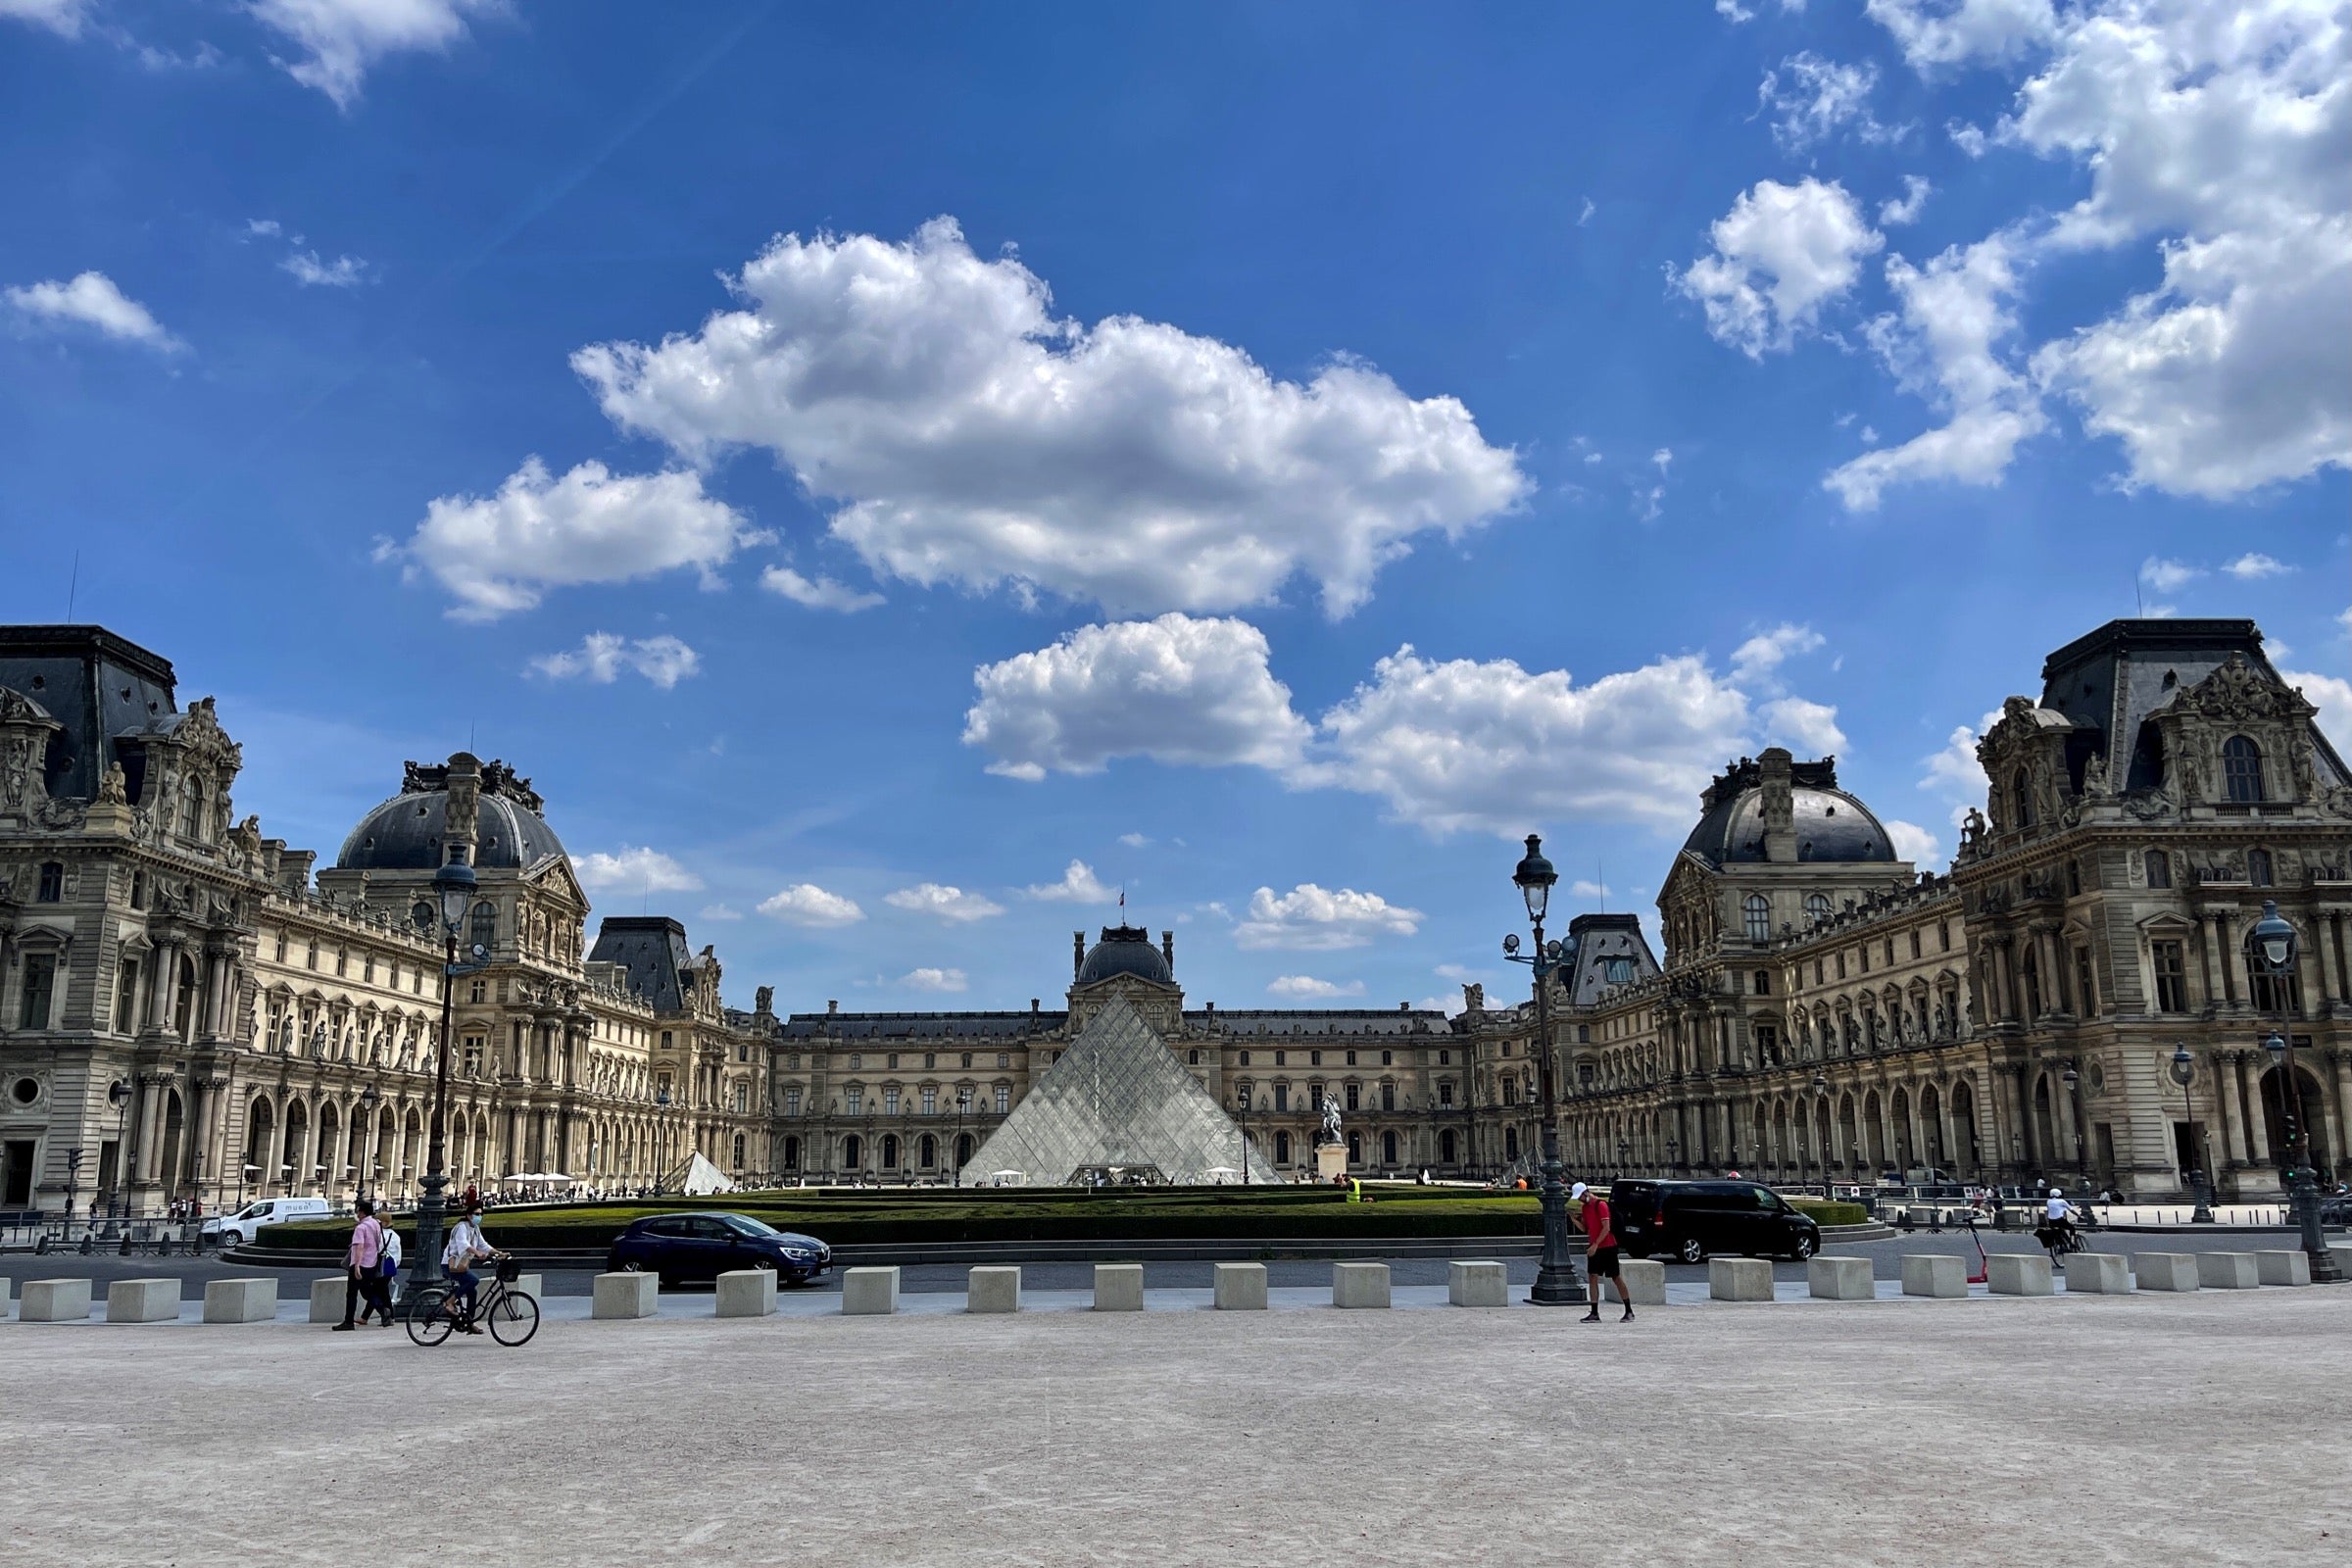 Outside of the Louvre in Paris